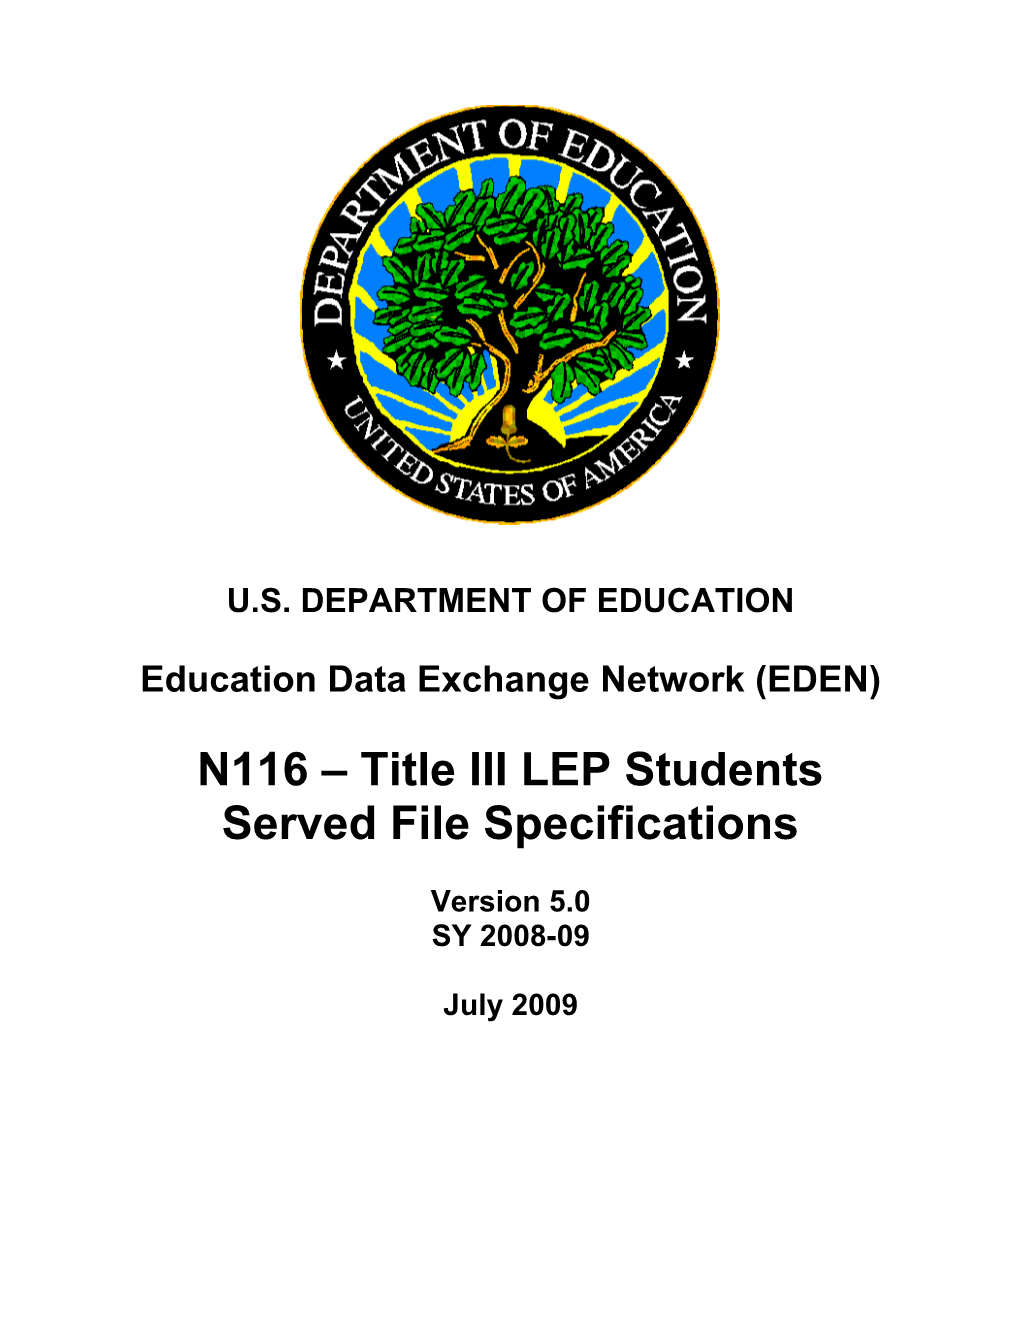 N116 Title III LEP Students Served File Specifications (MS Word)